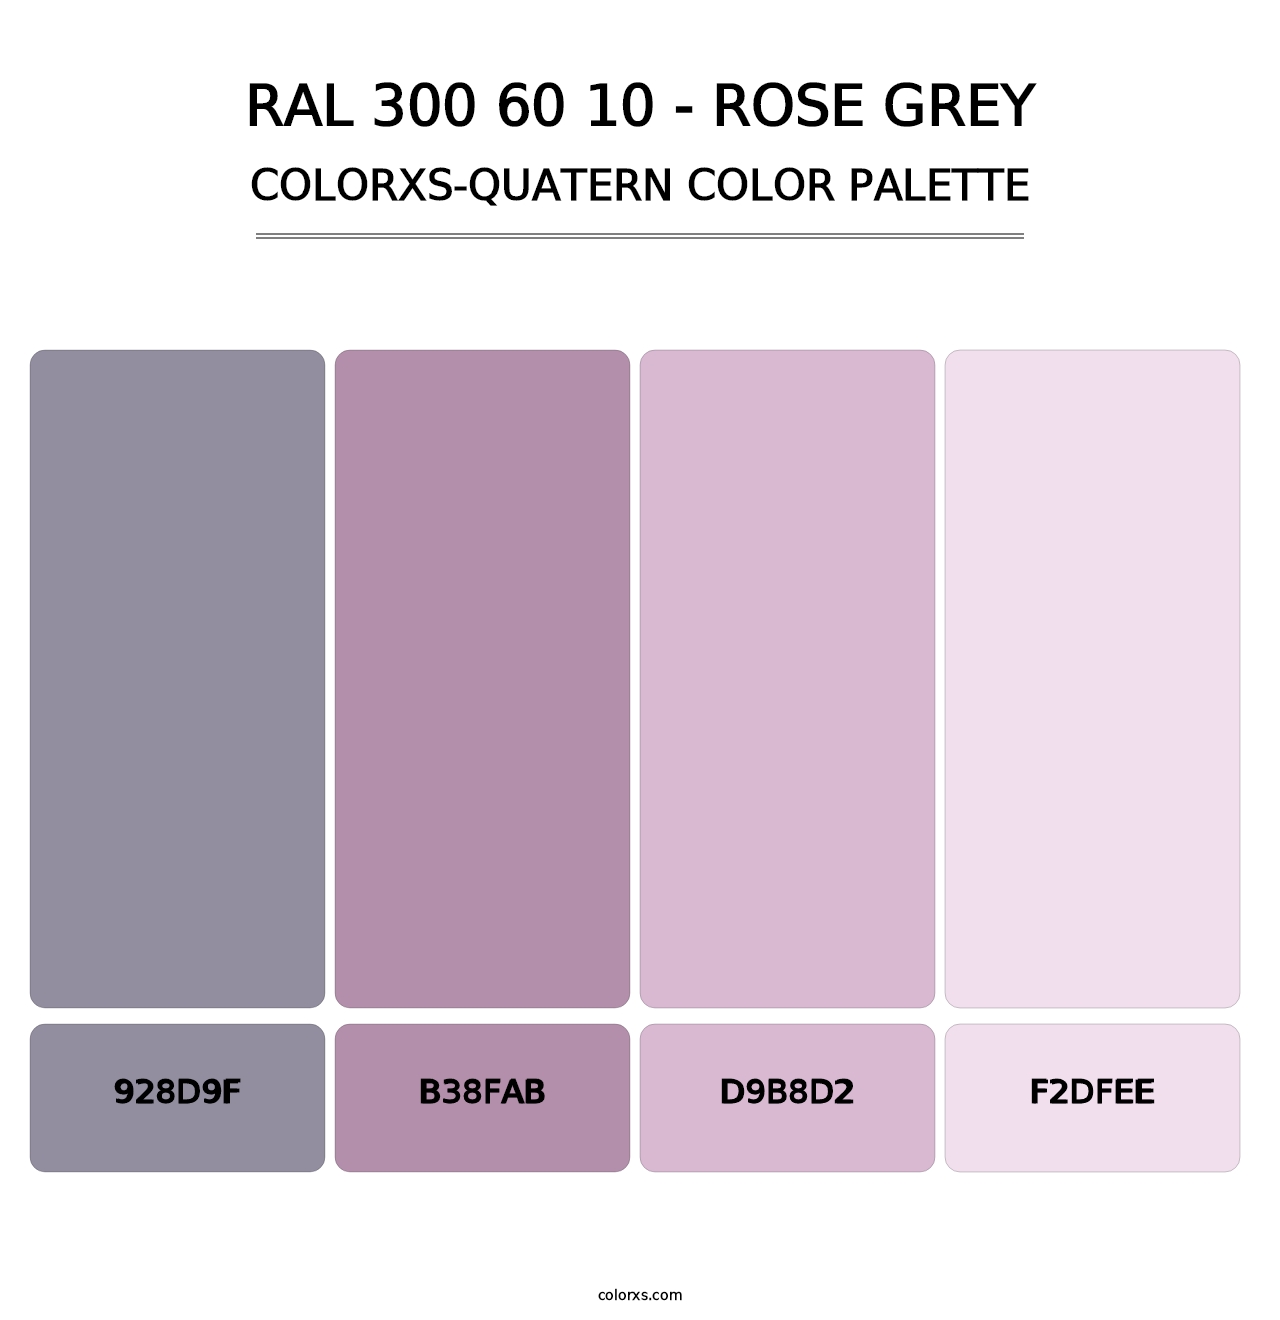 RAL 300 60 10 - Rose Grey - Colorxs Quatern Palette